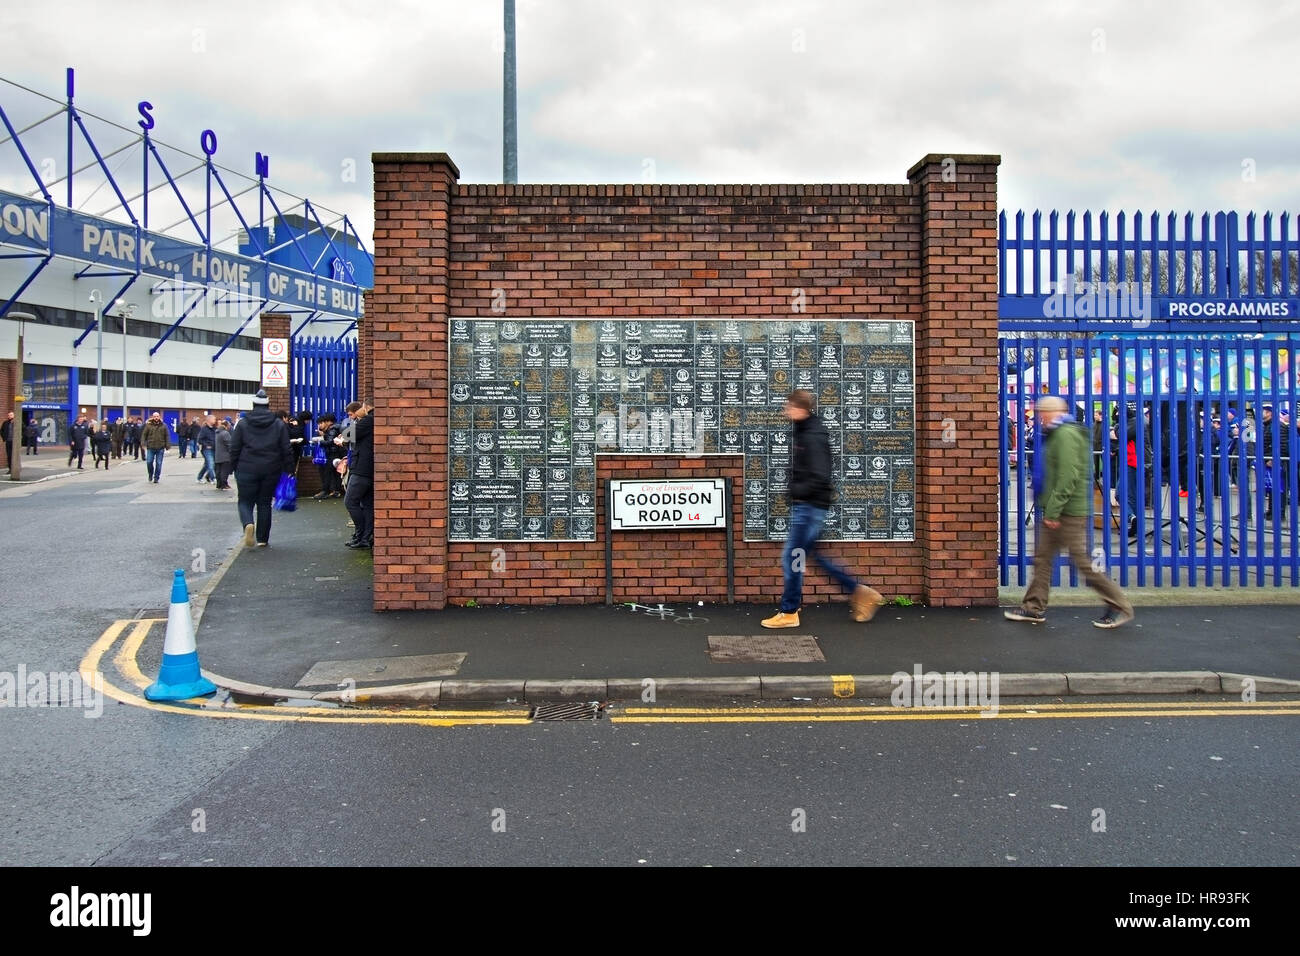 Fans start to arrive at Goodison Park for Everton's home match against Sunderland, Liverpool UK Stock Photo